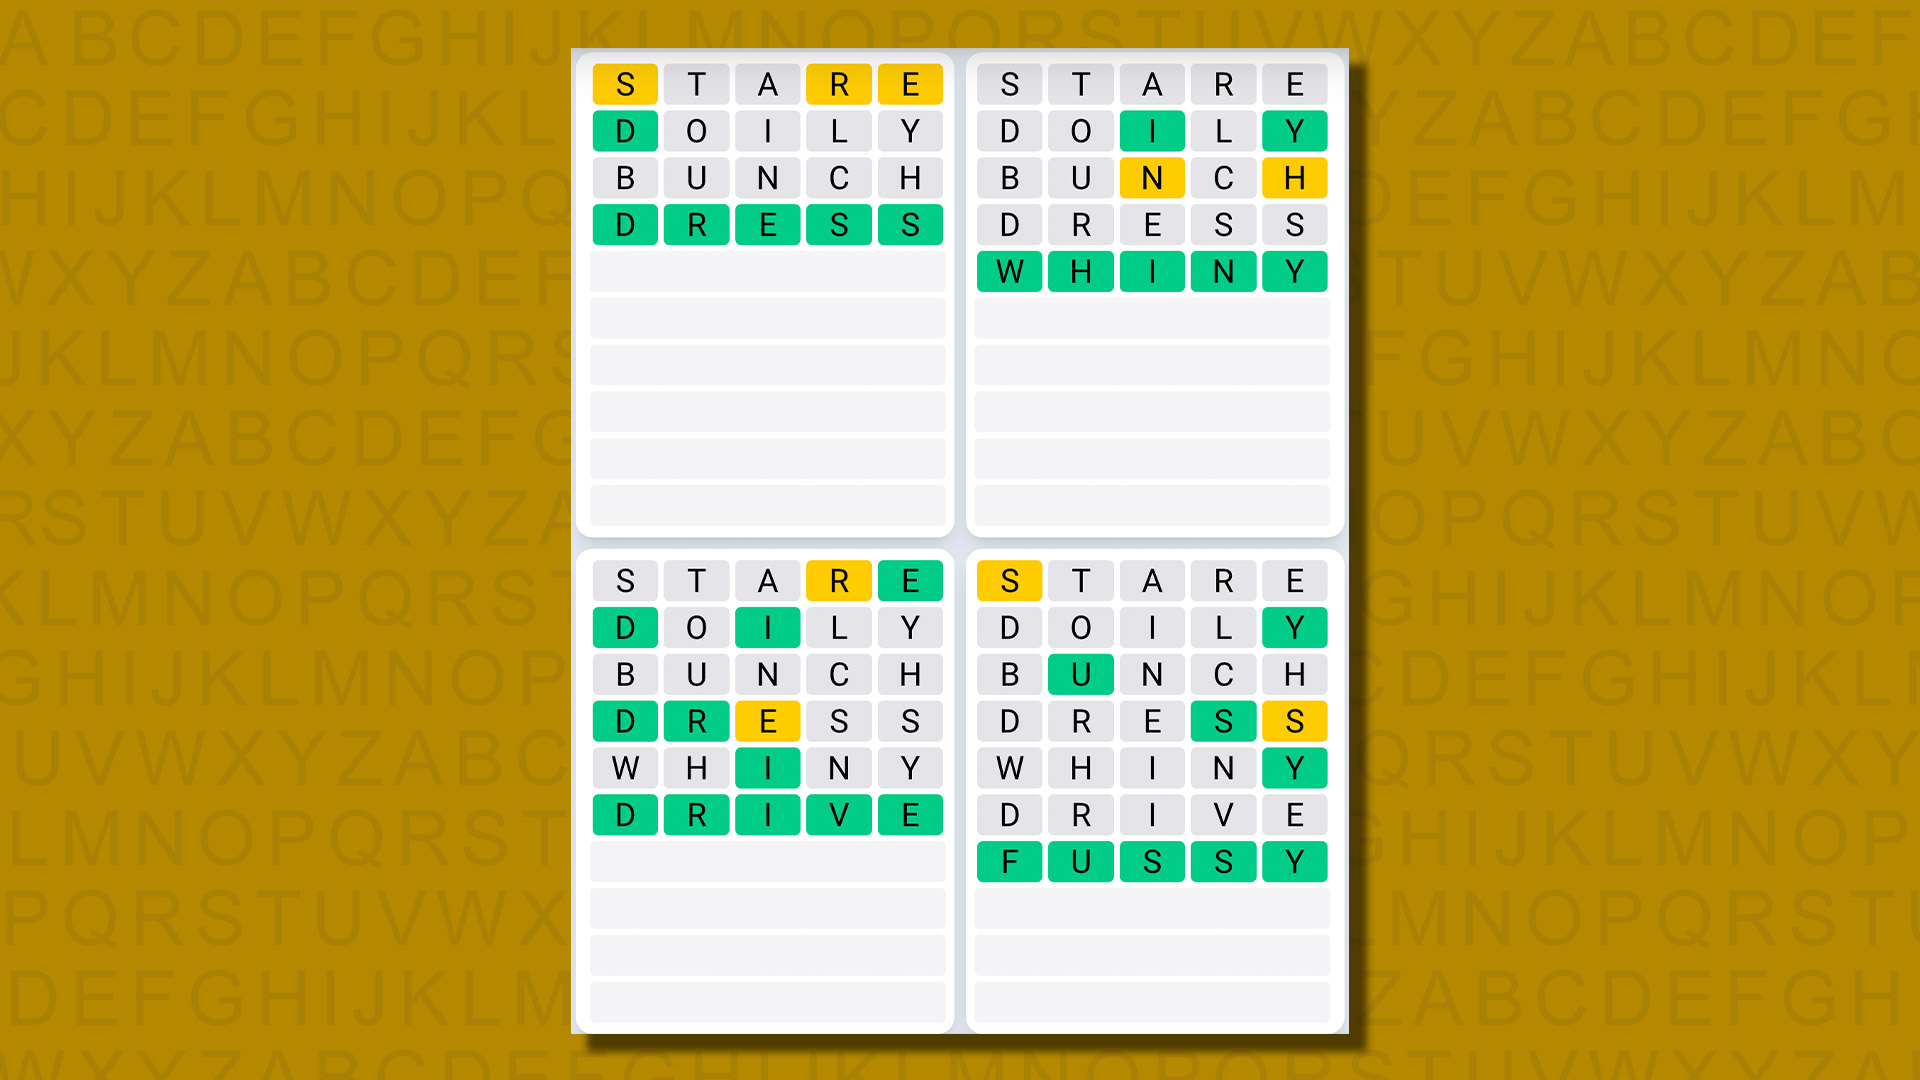 Quordle daily sequence answers for game 658 on a yellow background